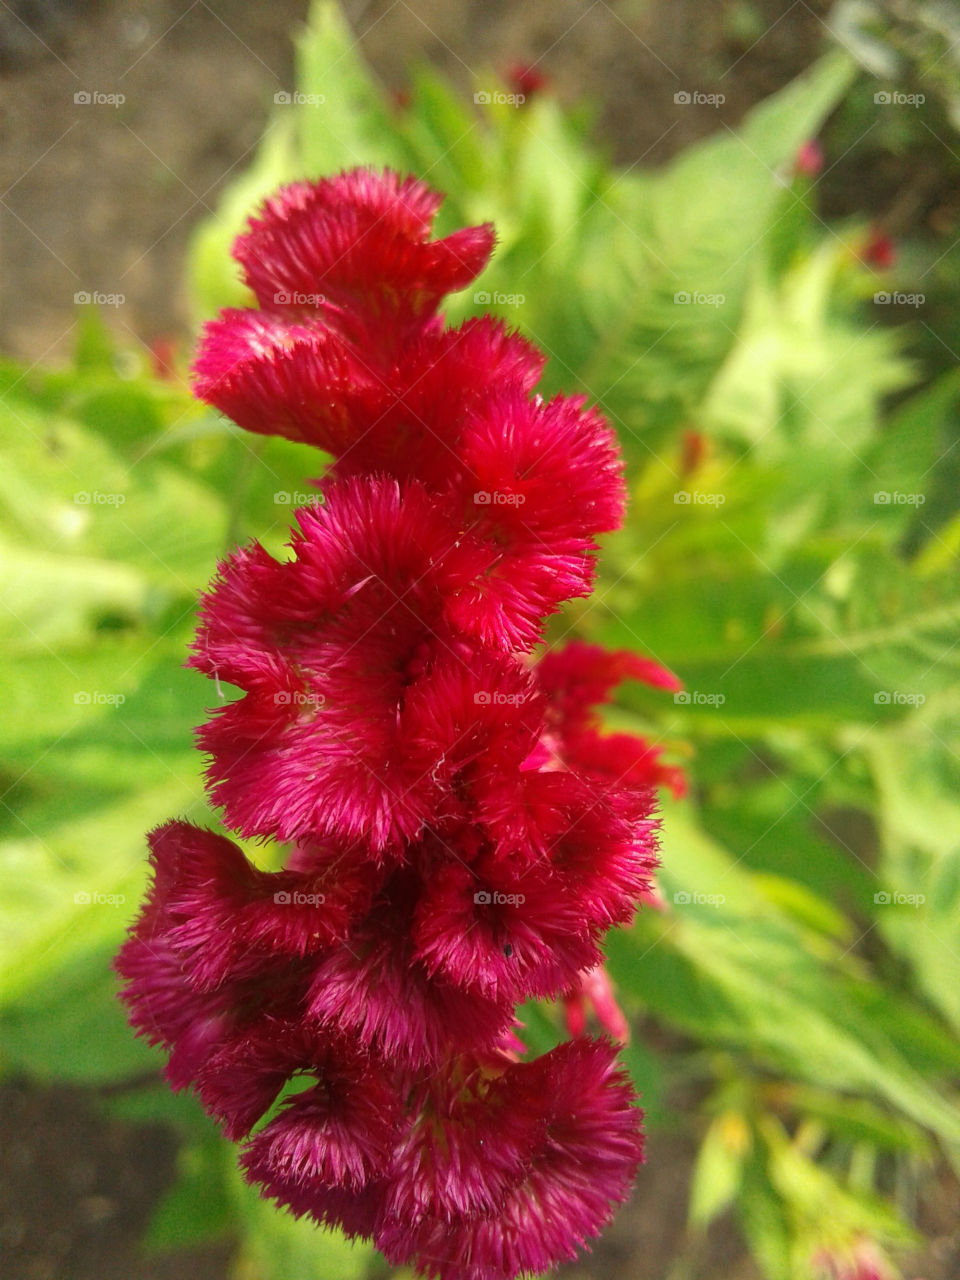 Flower image or wallpaper, It is brain Celosia cockscomb flower with red velvet colour and green foliage blurred background.